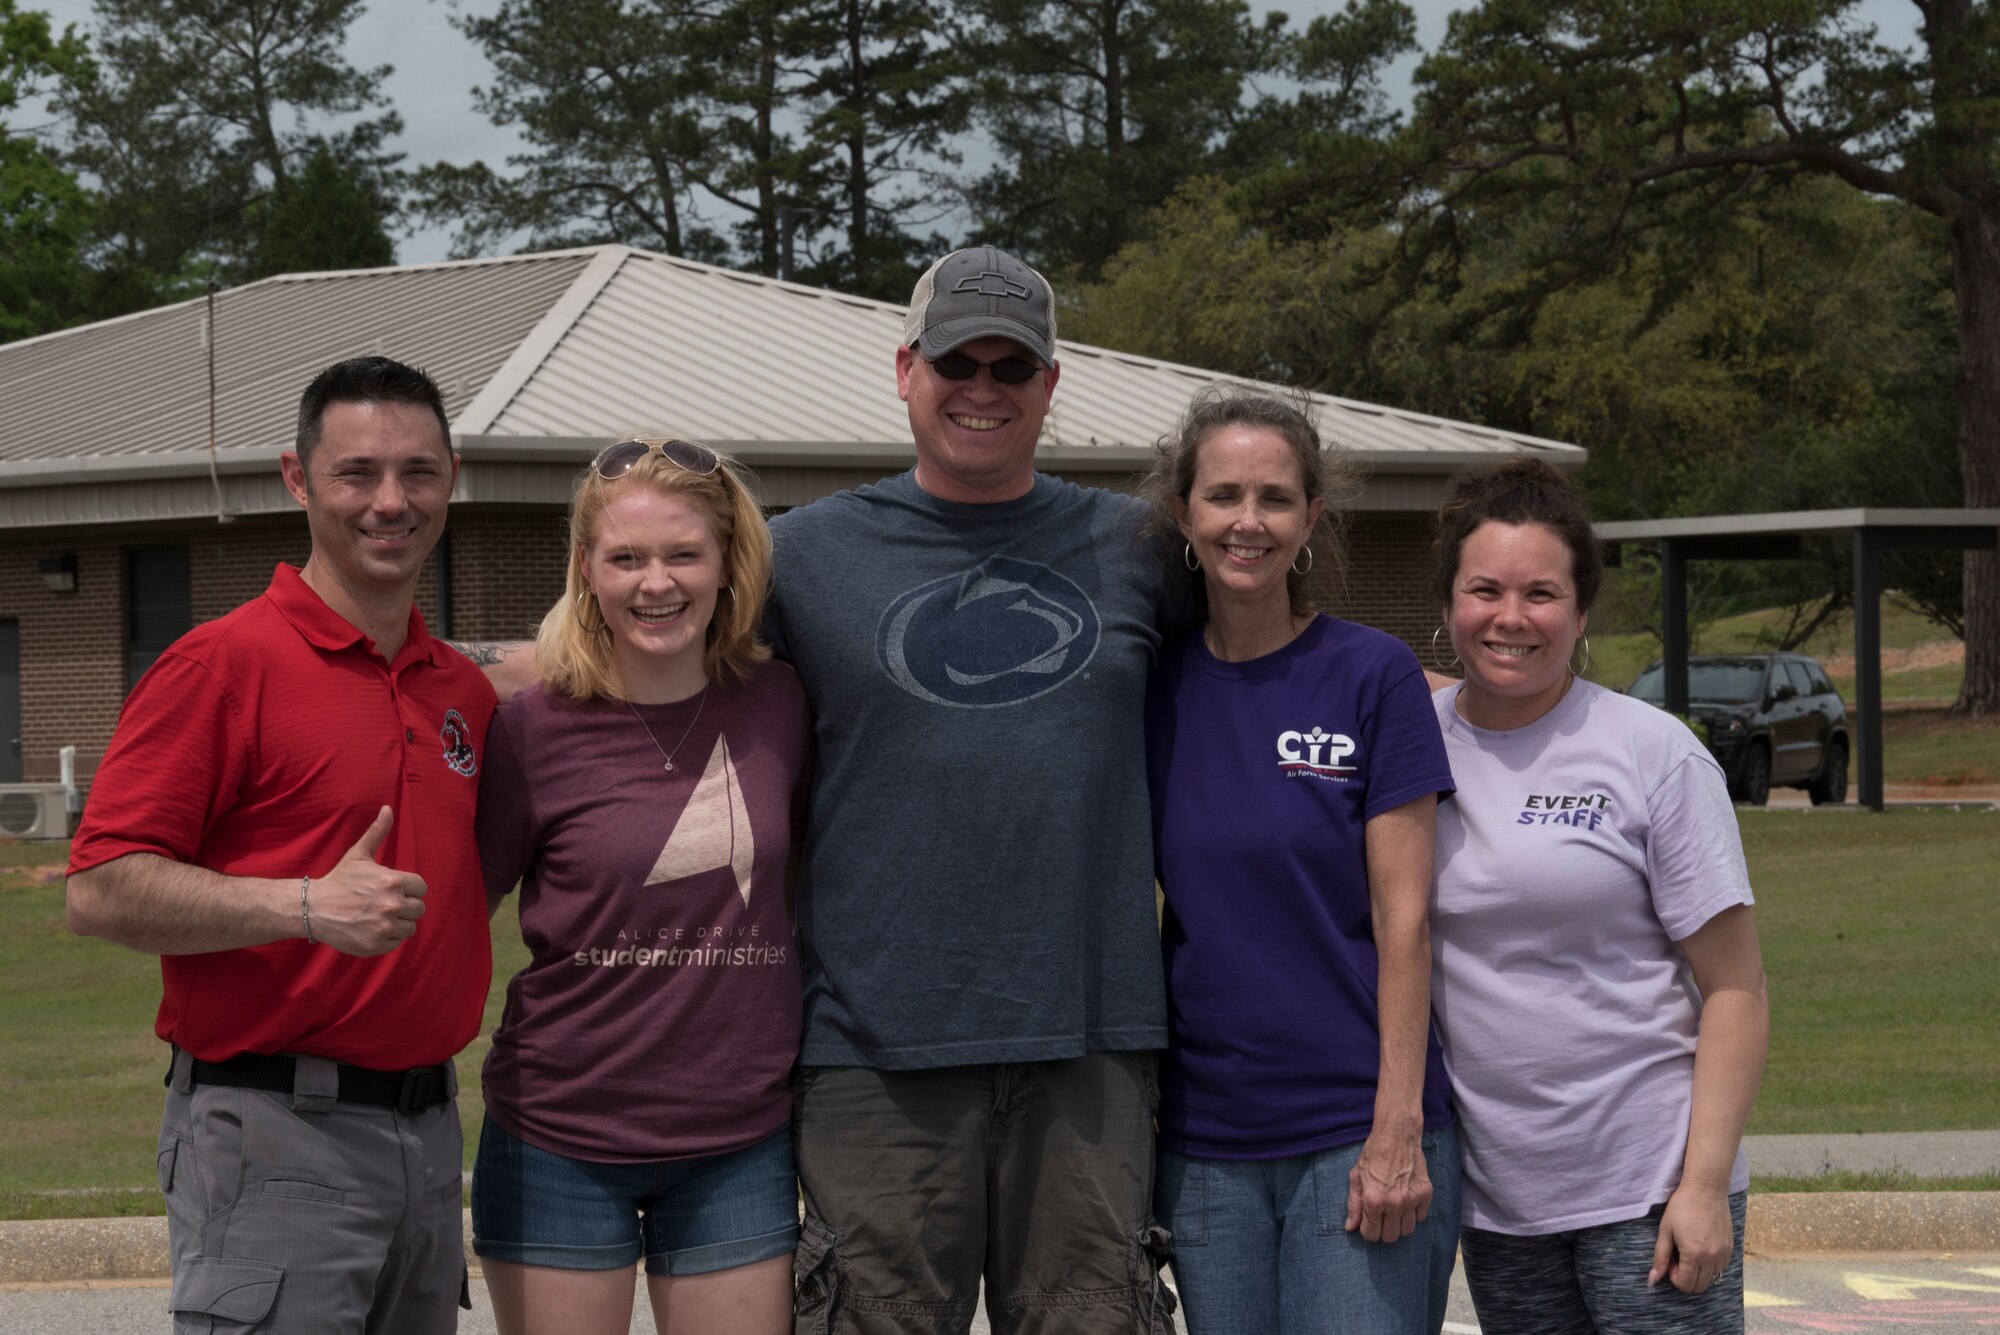 Julie A. Lego, Youth of the Year recipient, poses for a photo with her family and 20th Force Support Squadron leadership on Shaw Air Force Base, SC, April 13, 2019.